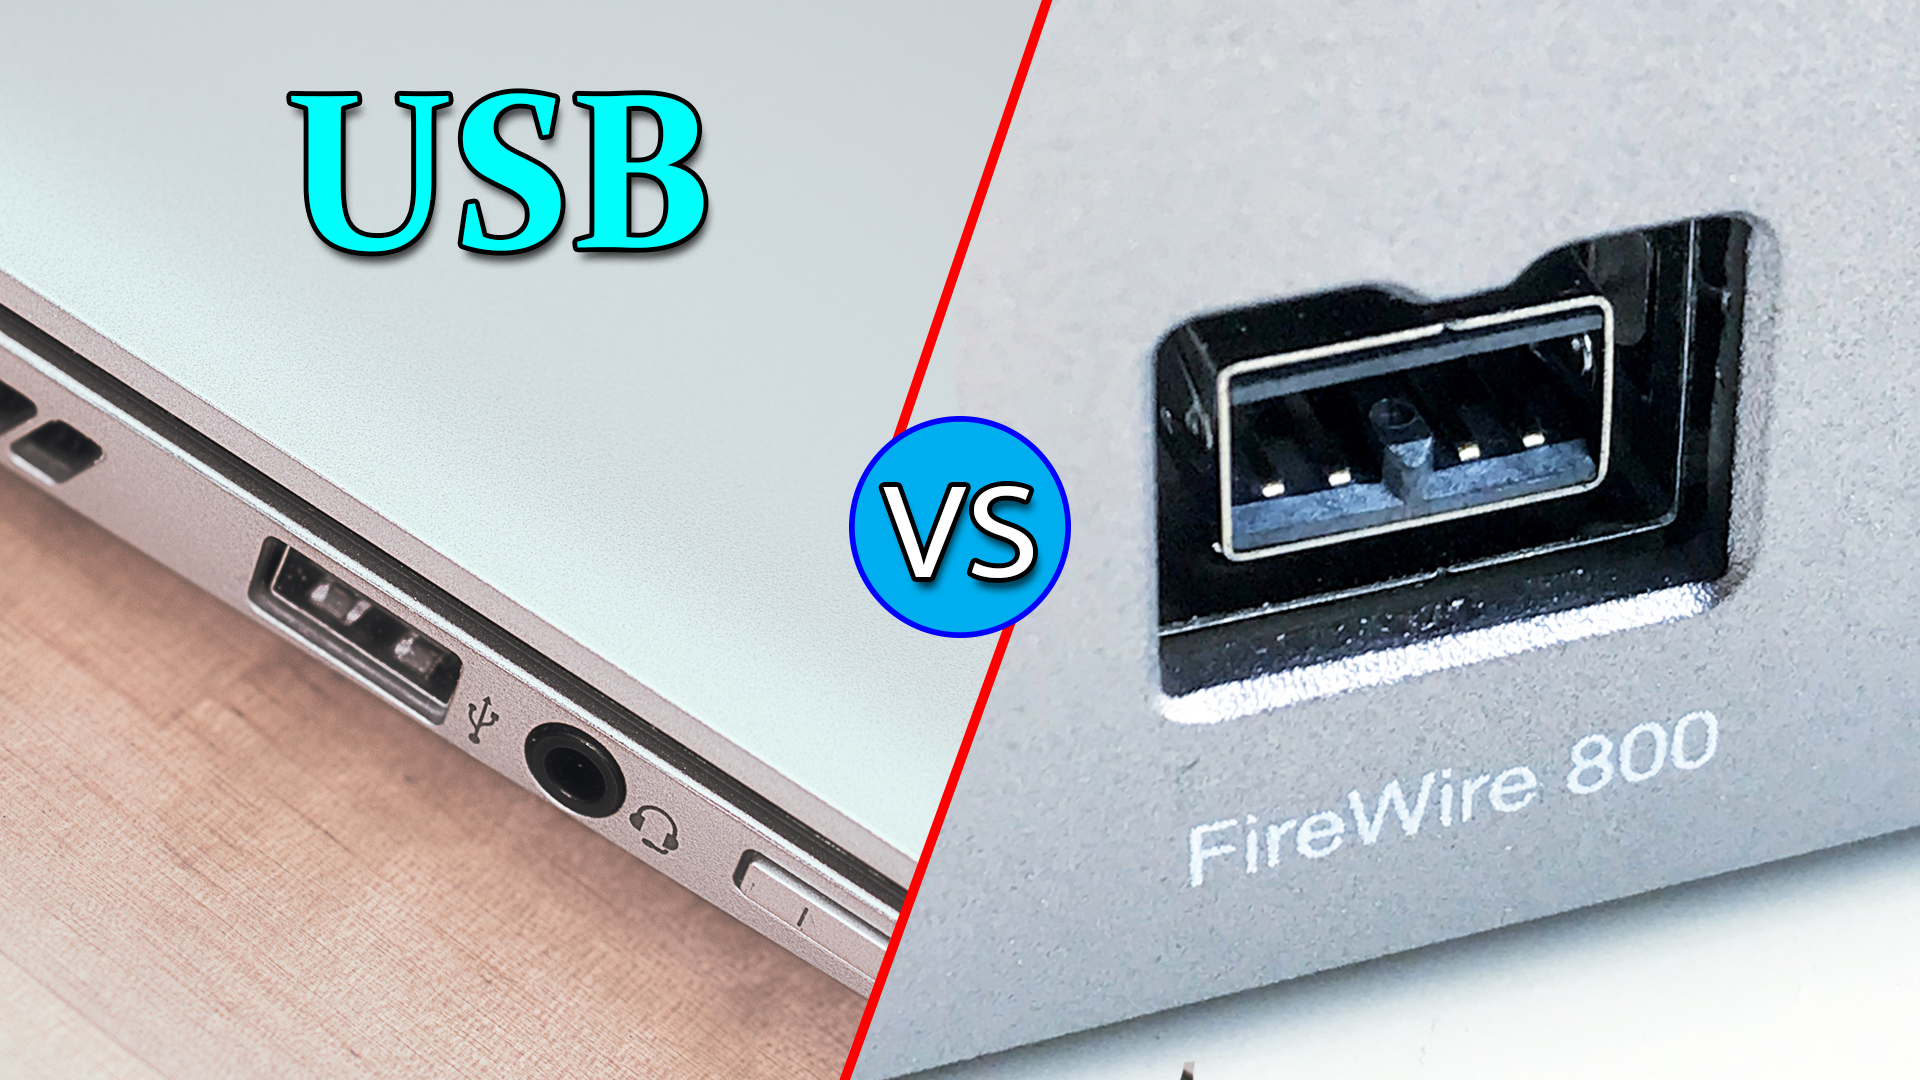 USB Vs FireWire: What are the differences?